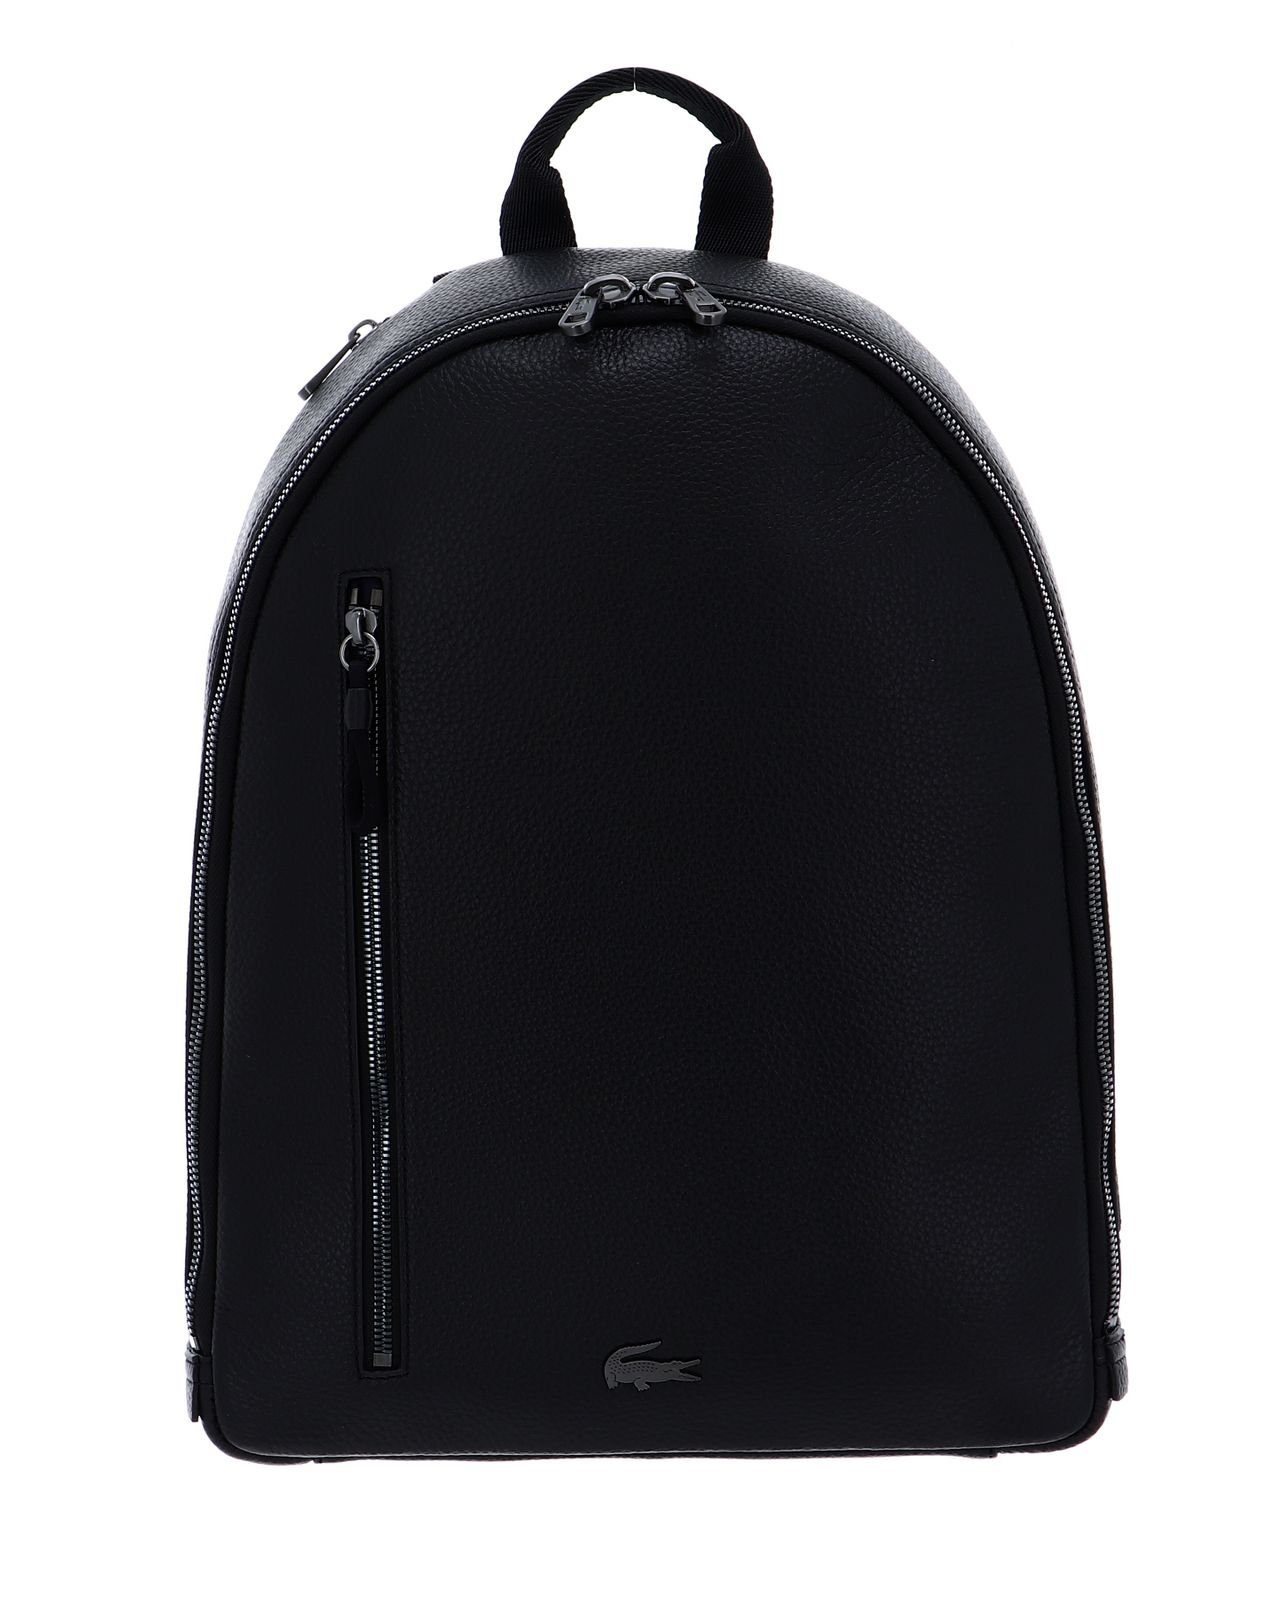 Lacoste Rucksack Soft Mate